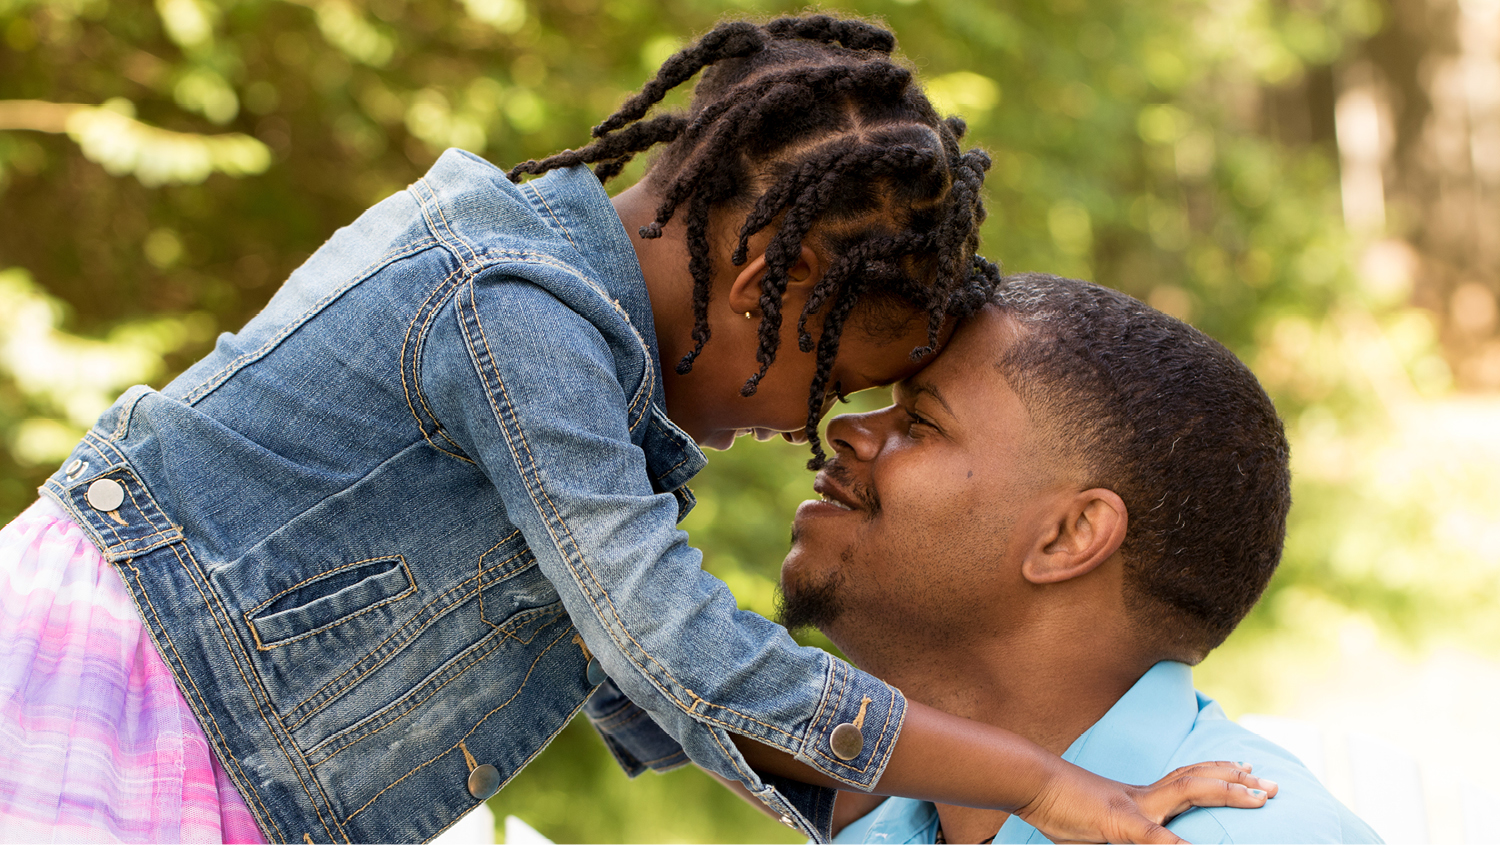 A little girl with braids in her hair wearing a jean jacket puts her forehead against her father's forehead. They are smiling at each other. 